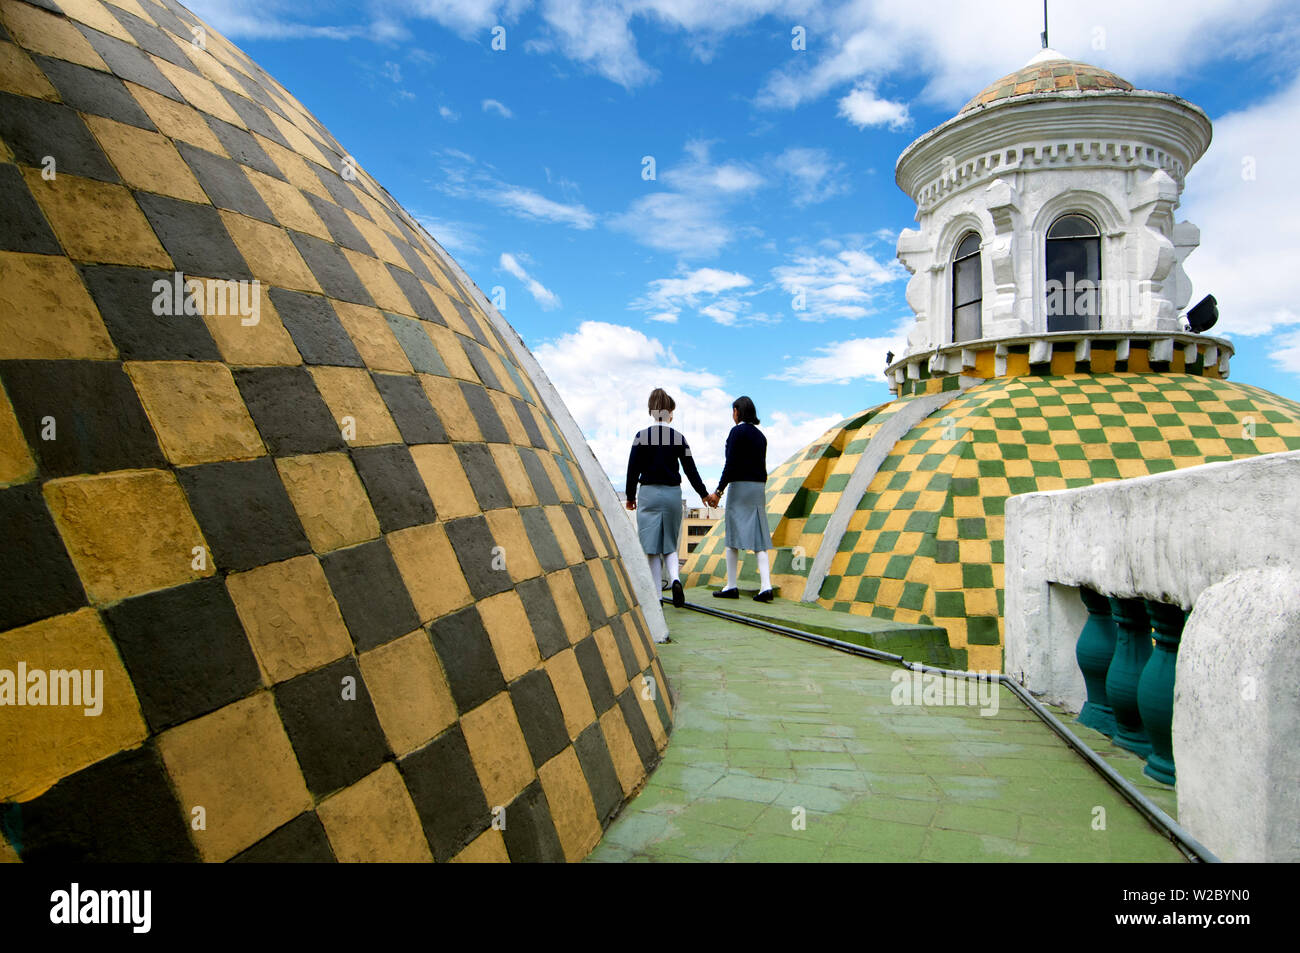 Checkered Tiled Green And Gold Domes of The Metropolitan Cathedral of Quito, La Catedral, Uniformed Students Provide Rooftop Tours, Mudejar Architectural Style, Old Town, Centro Historico, UNESCO World Cultural Heritage Site, Quito, Ecuador Stock Photo